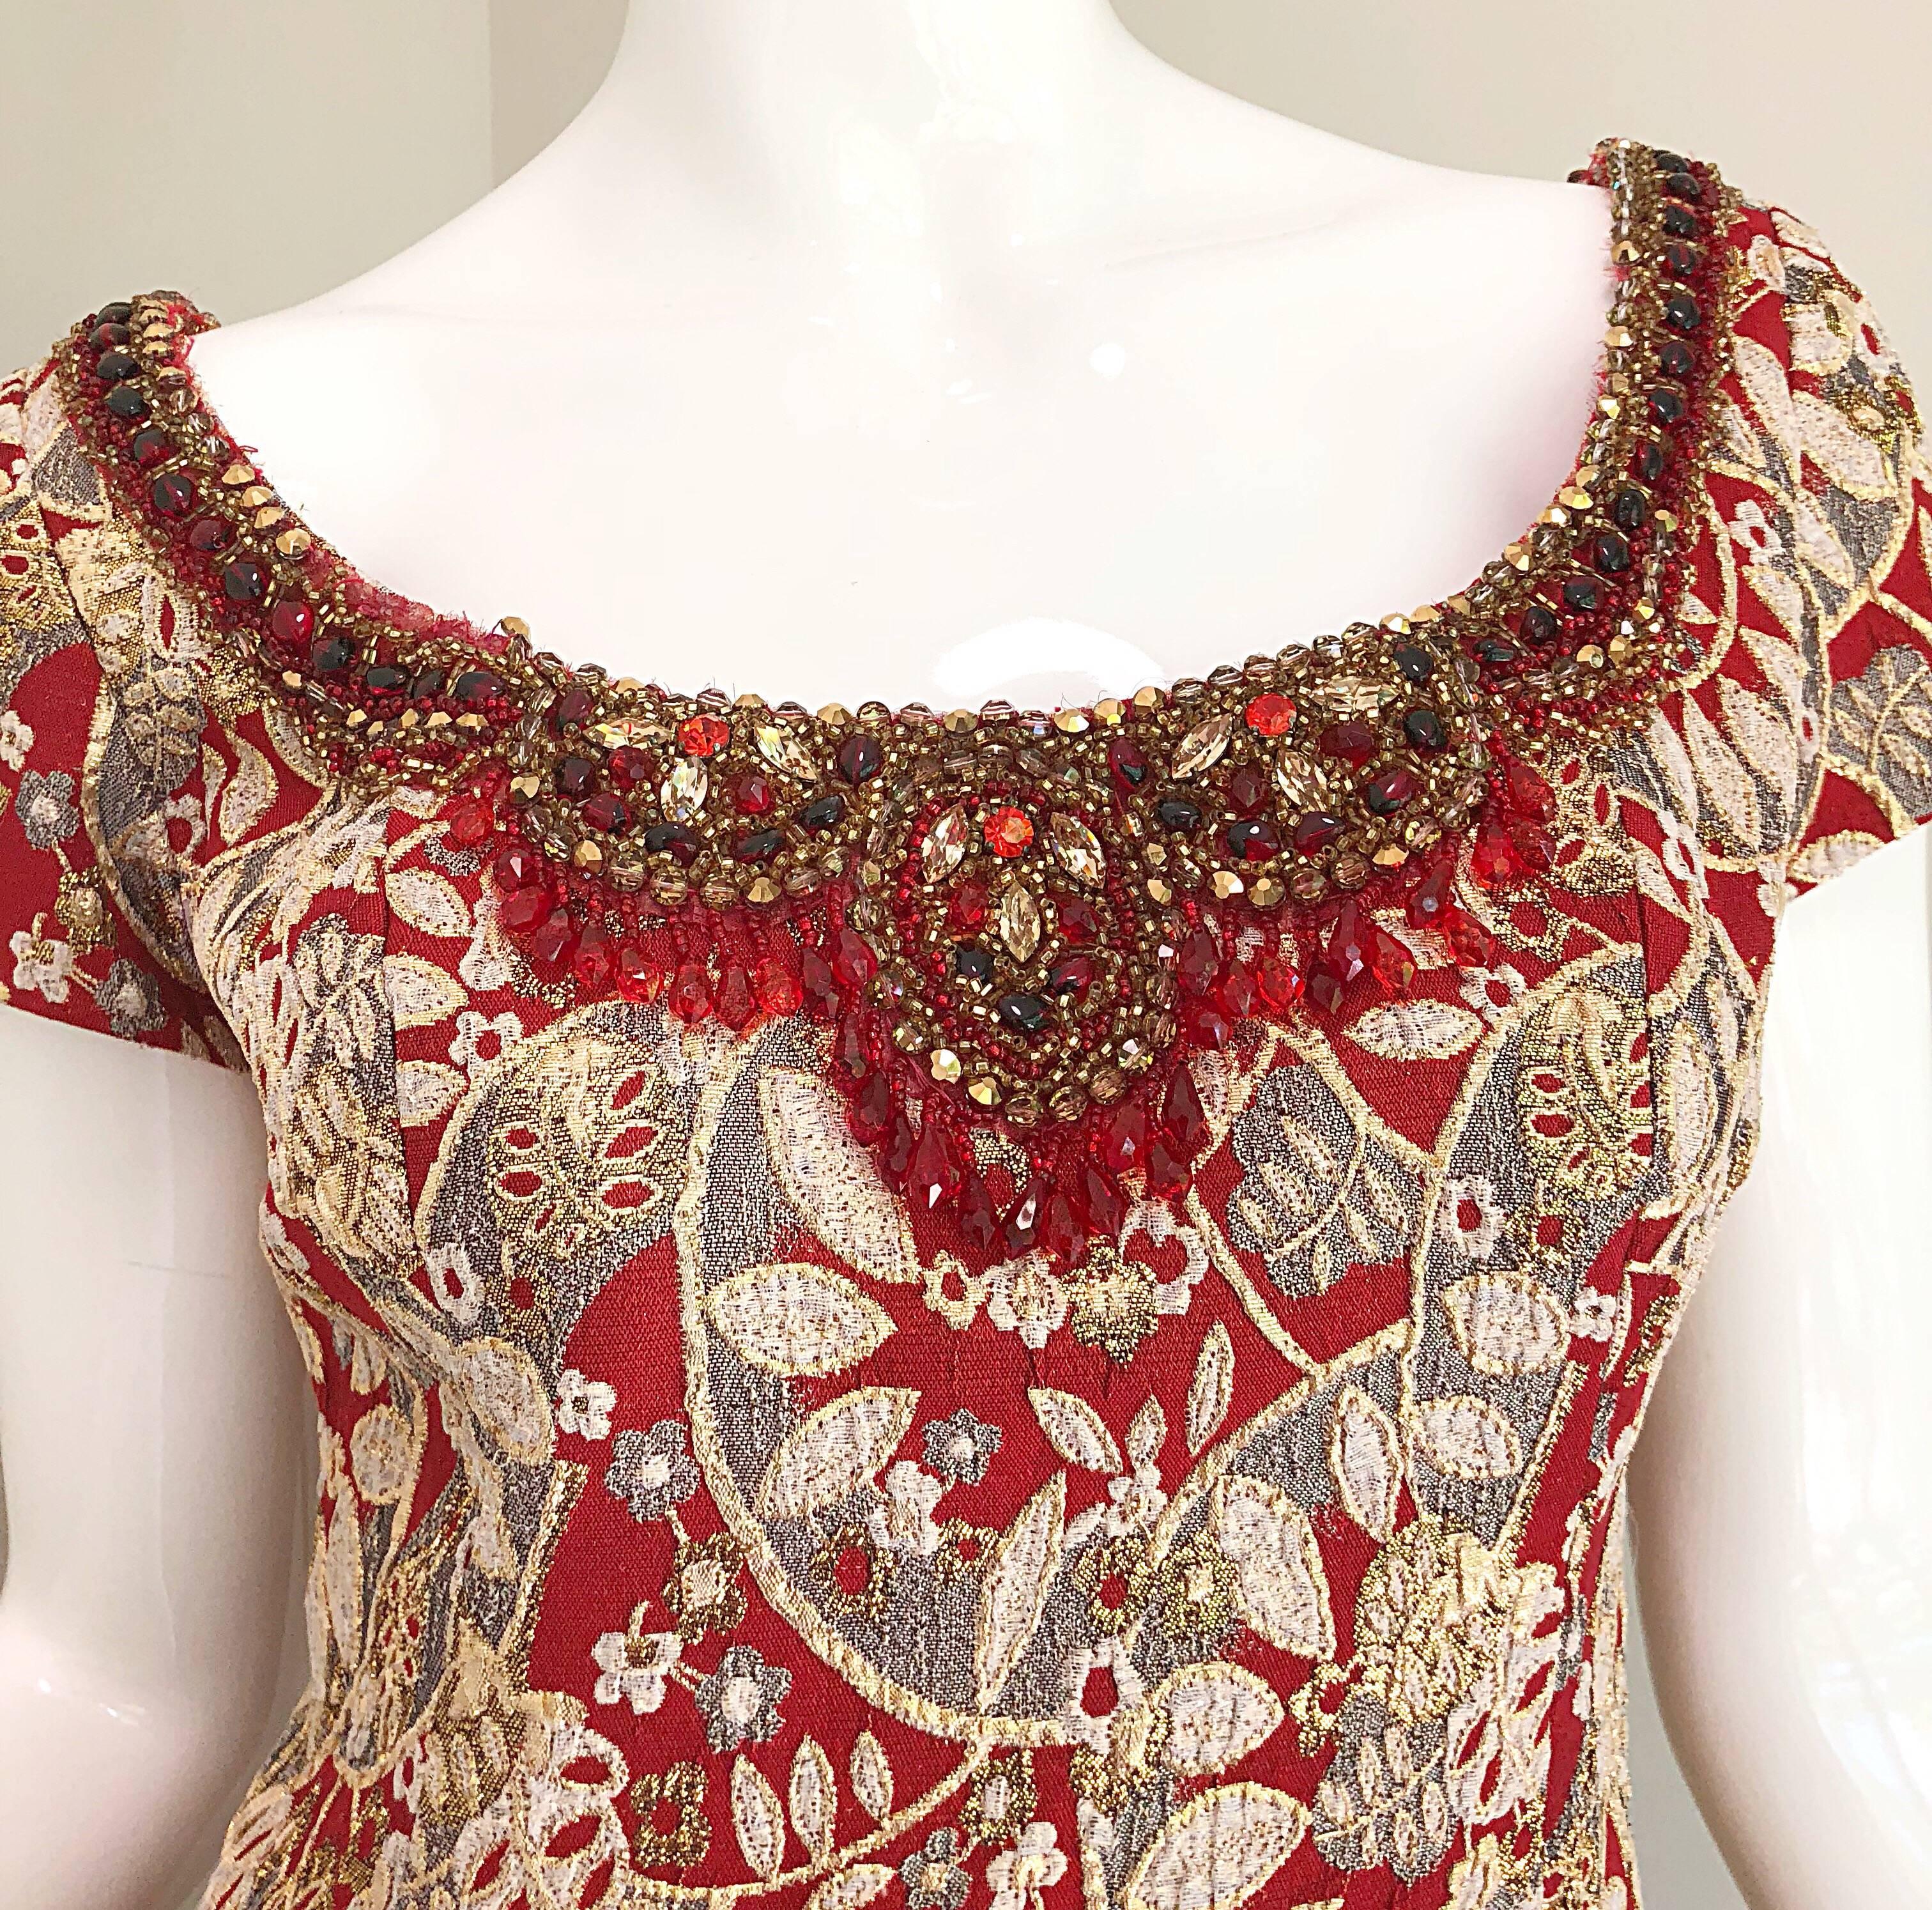 Gorgeous vintage 1960s MONTALDOS red and gold silk brocade beaded evening gown and full length jacket! The luxurious fabric is made of red and metallic gold silk brocade. The dress features hundreds of hand-sewn ruby red rhinestones, crystals and